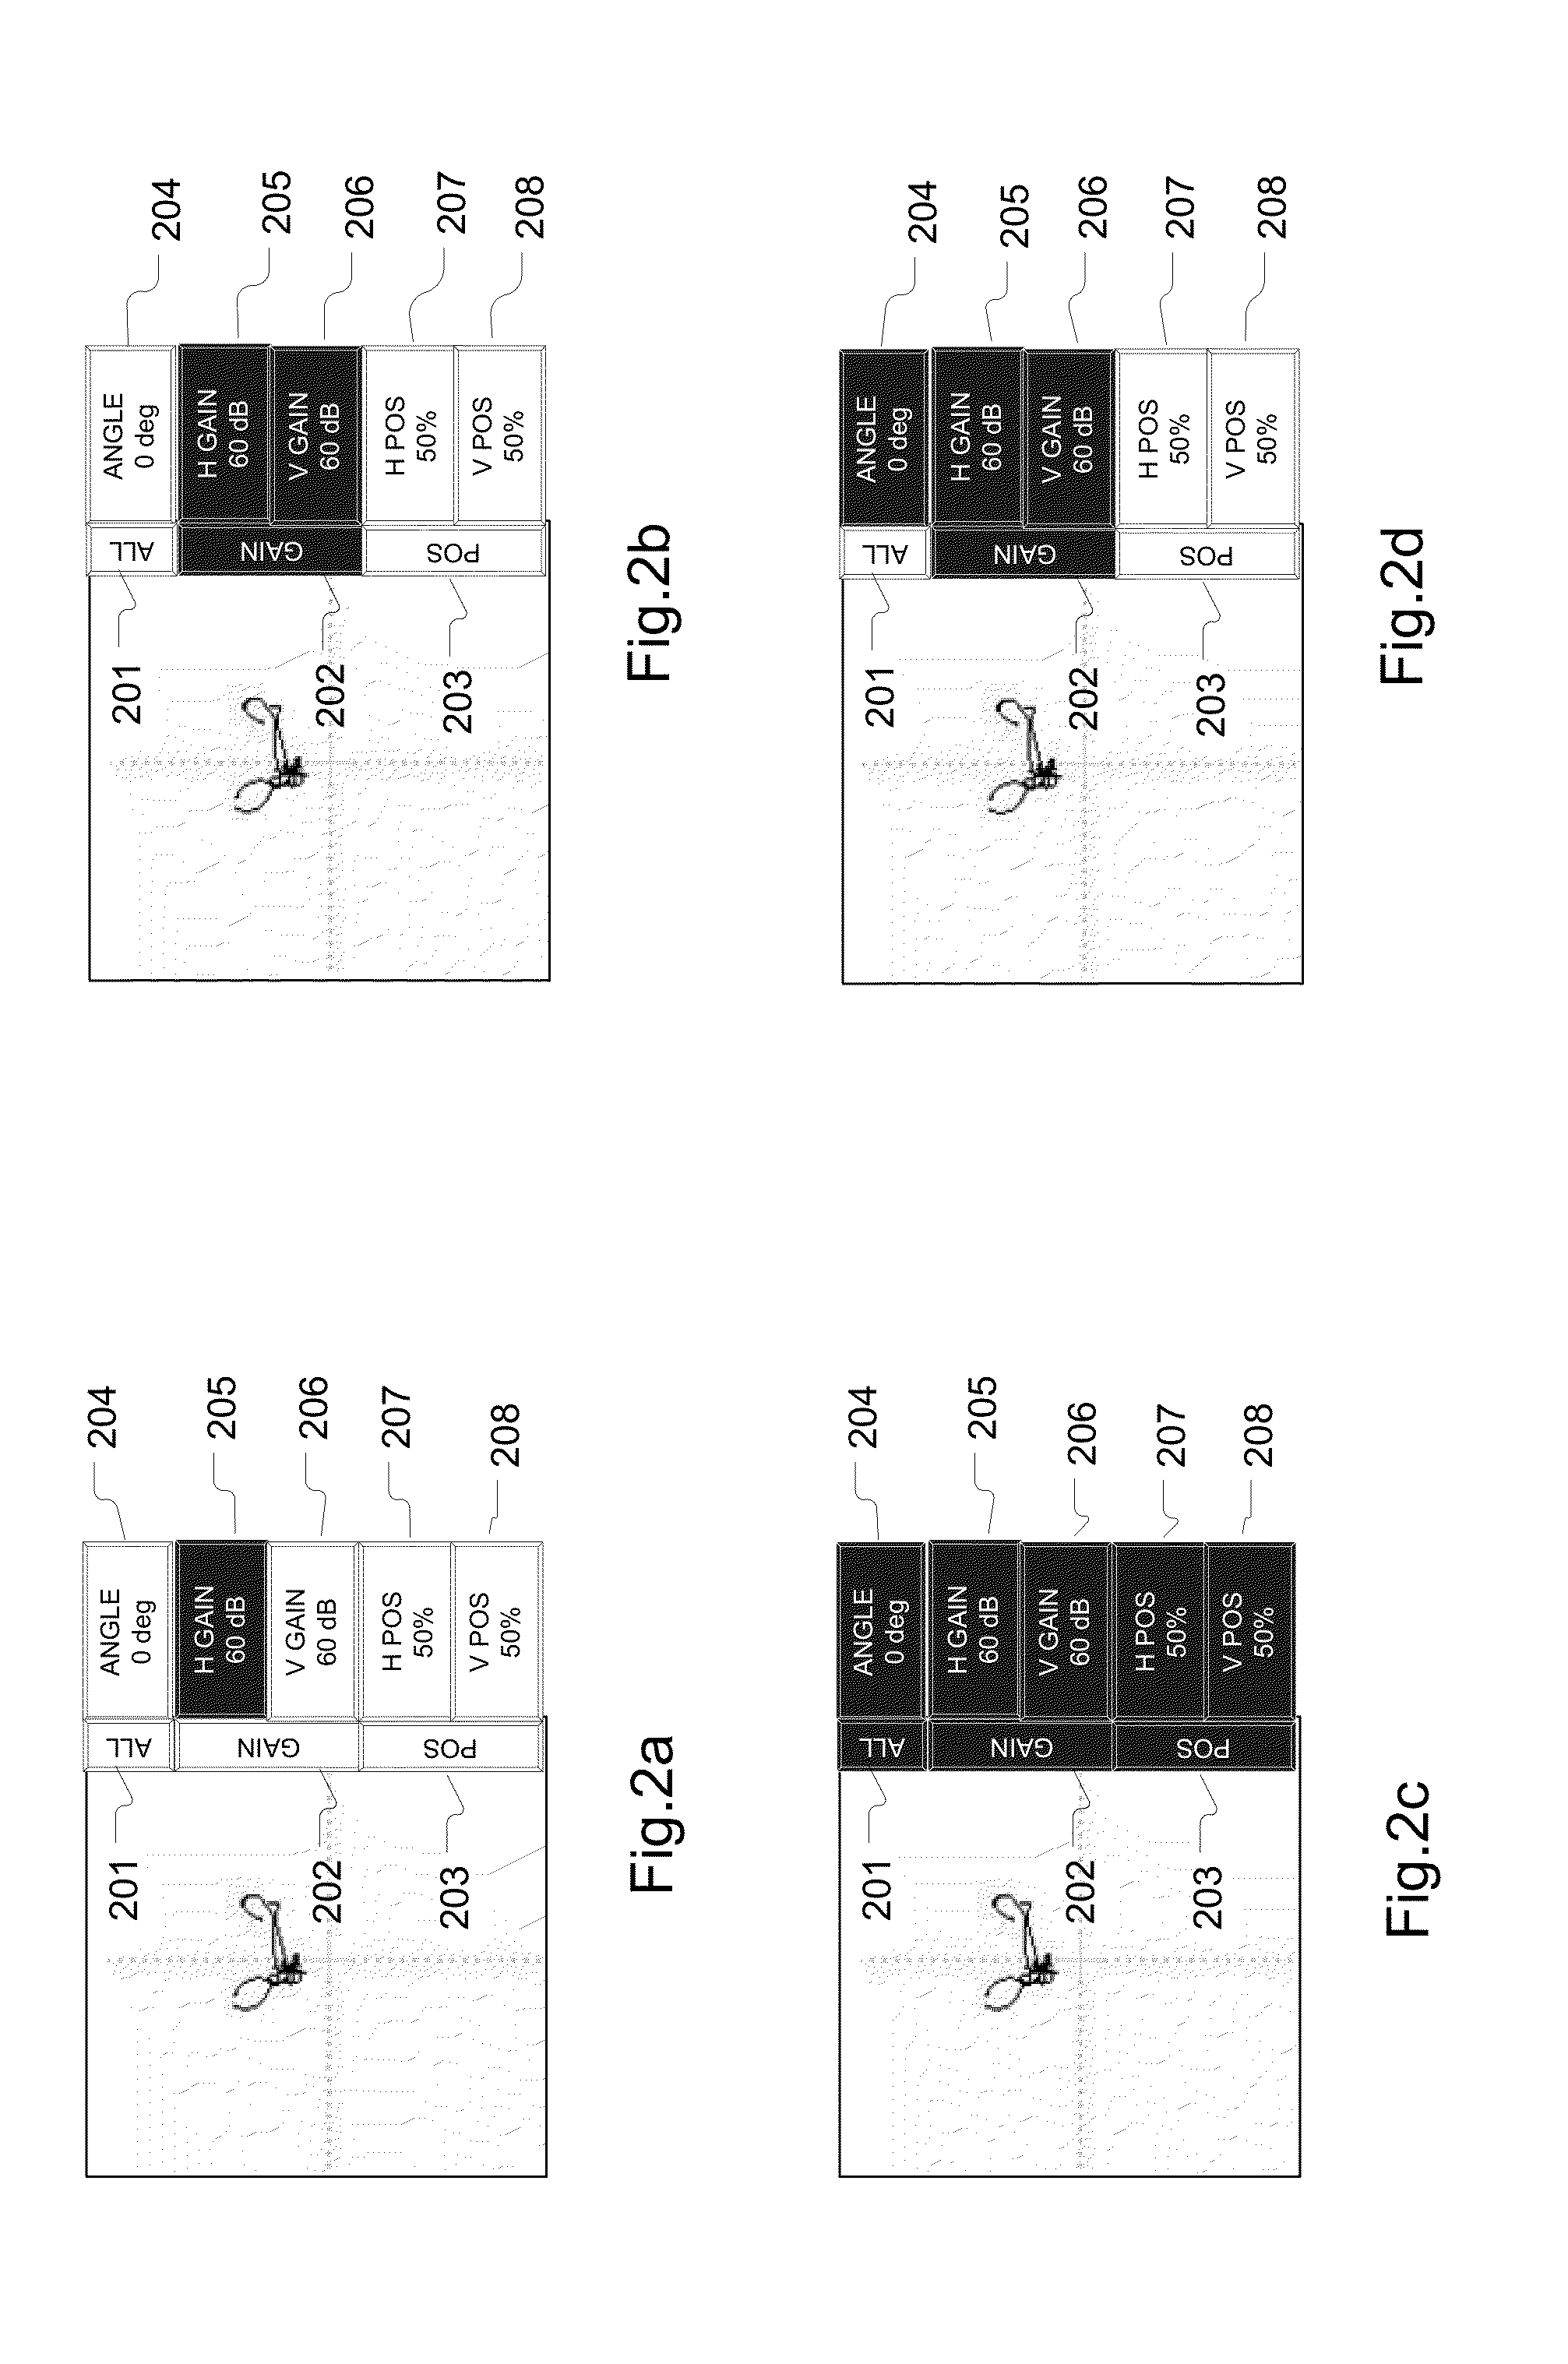 Method of manipulating impedance plane with a multi-point touch on touch screen